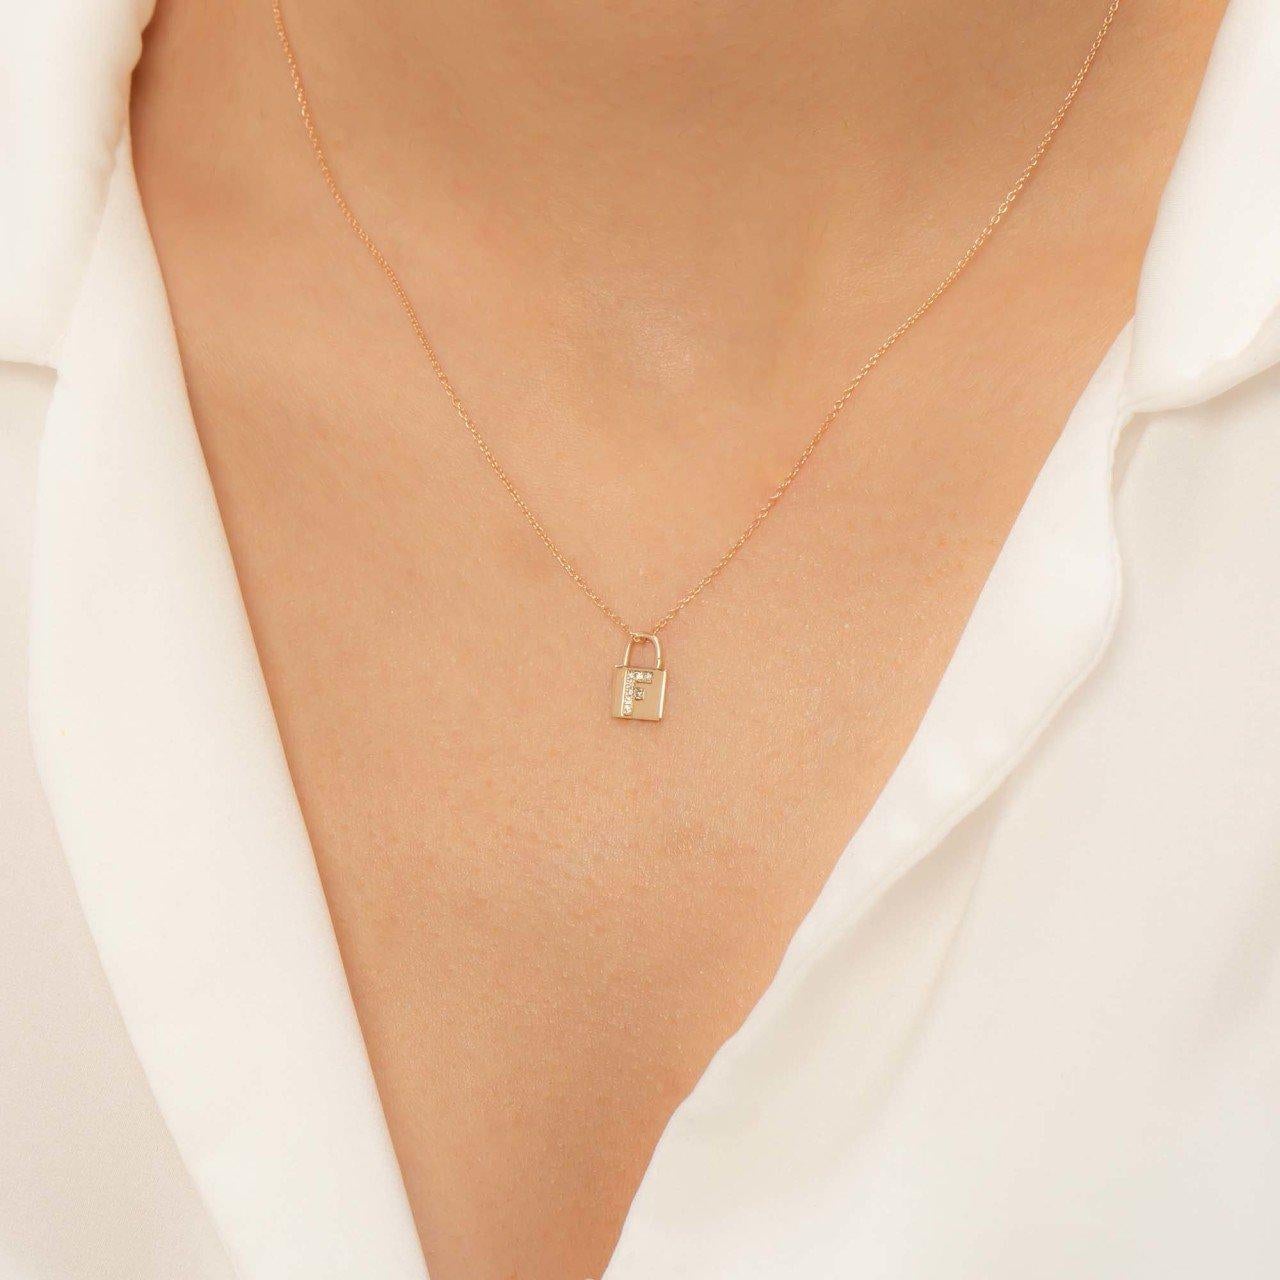 Diamond F Letter Pendant Gold Chain.

14K Solid Gold pieces are made to last forever. 14k gold will not oxidize or discolor, so you can wear your jewelry every day, everywhere.

Gold: 1.84gr 
Diamond: Round Cut 0.05ct F Color SI Clarity 



